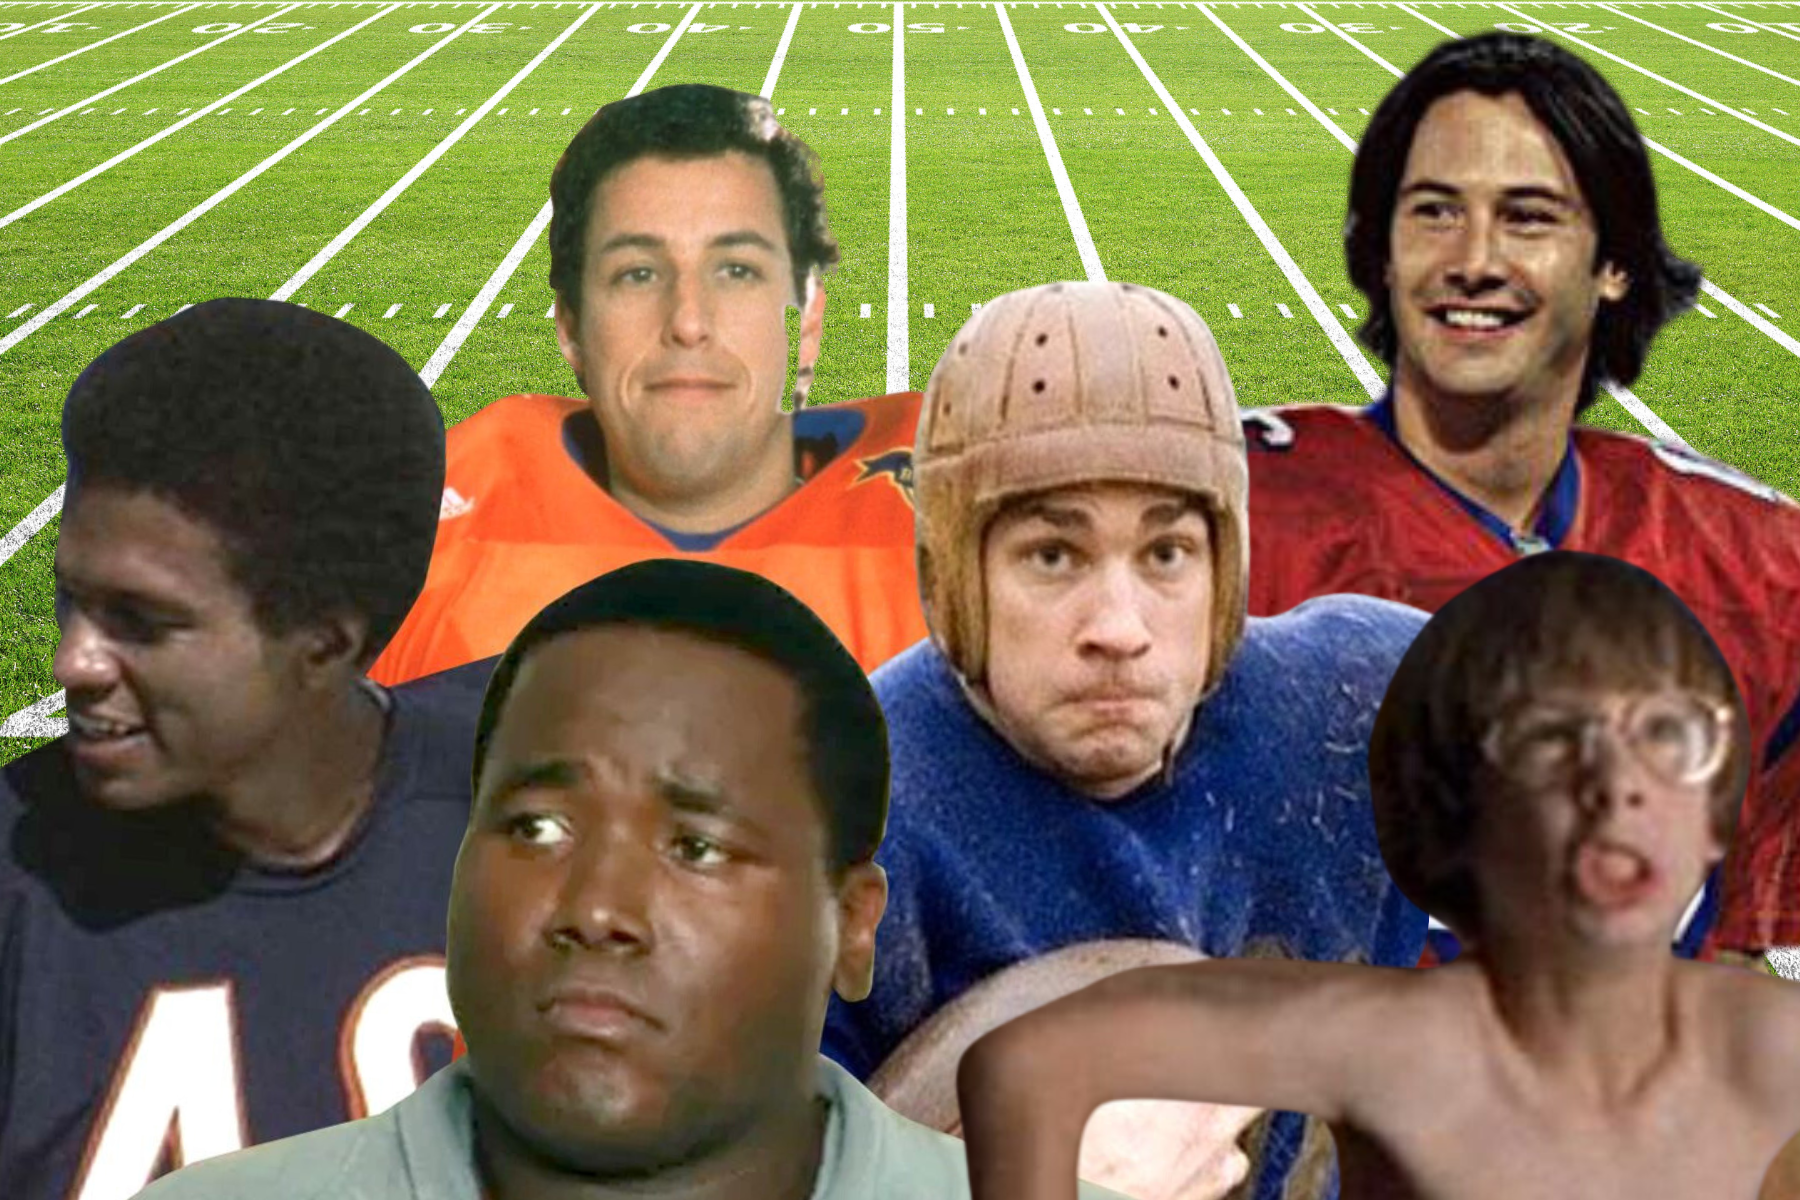 Can You Guess the Football Movie Based on its Movie Poster?